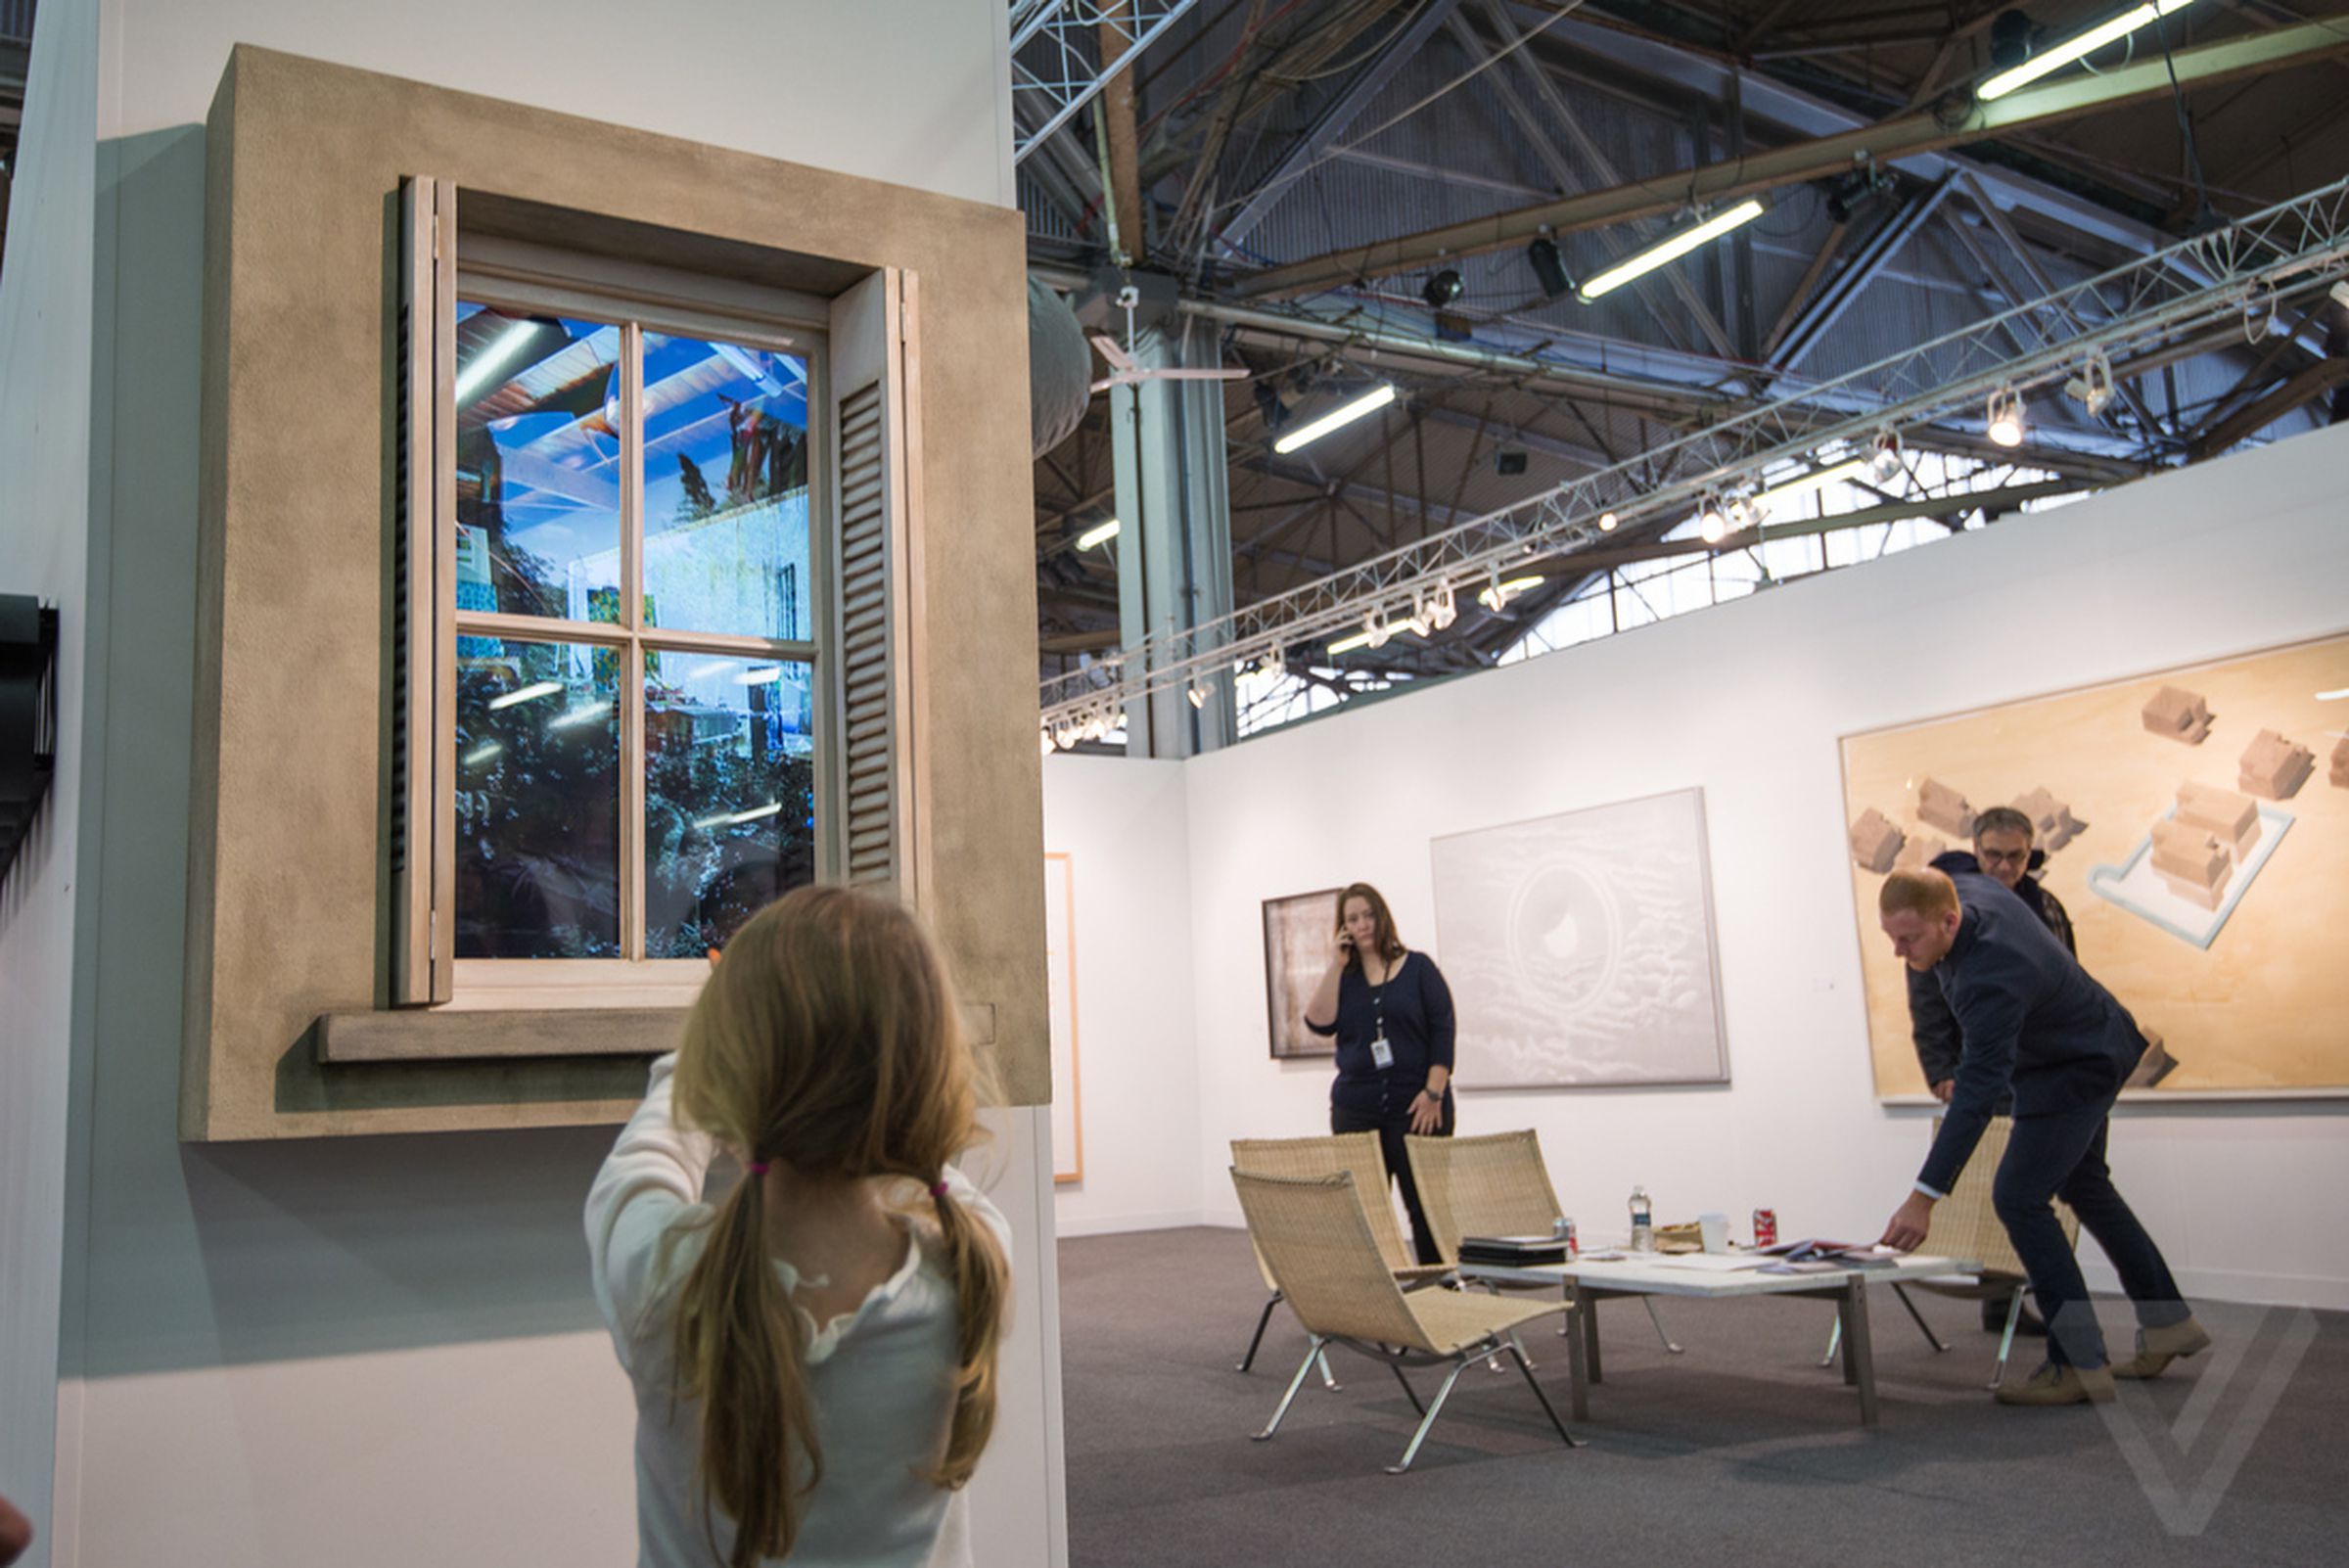 The 2013 Armory Show